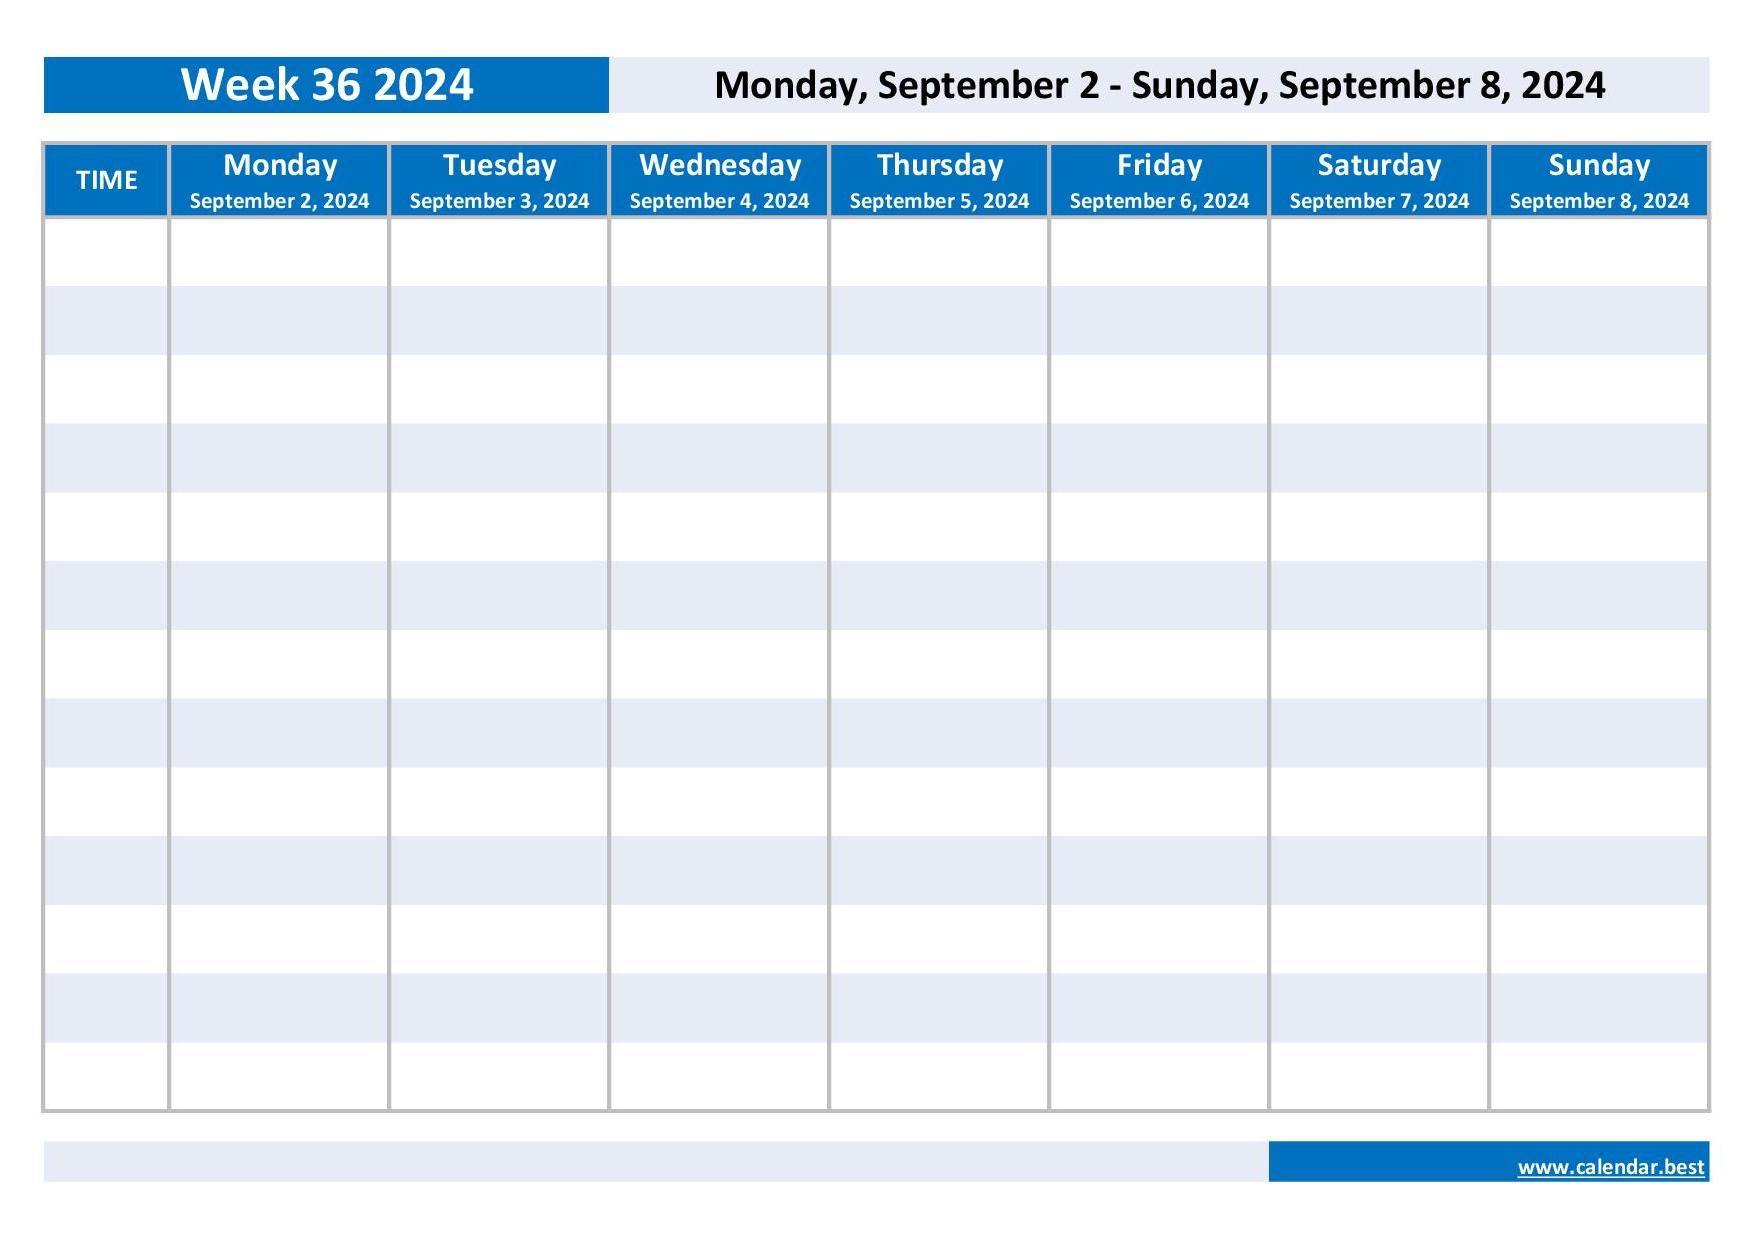 Week 36 2024: Dates, Calendar And Weekly Schedule To Print throughout Free Printable Calendar 2024 With Time Slots